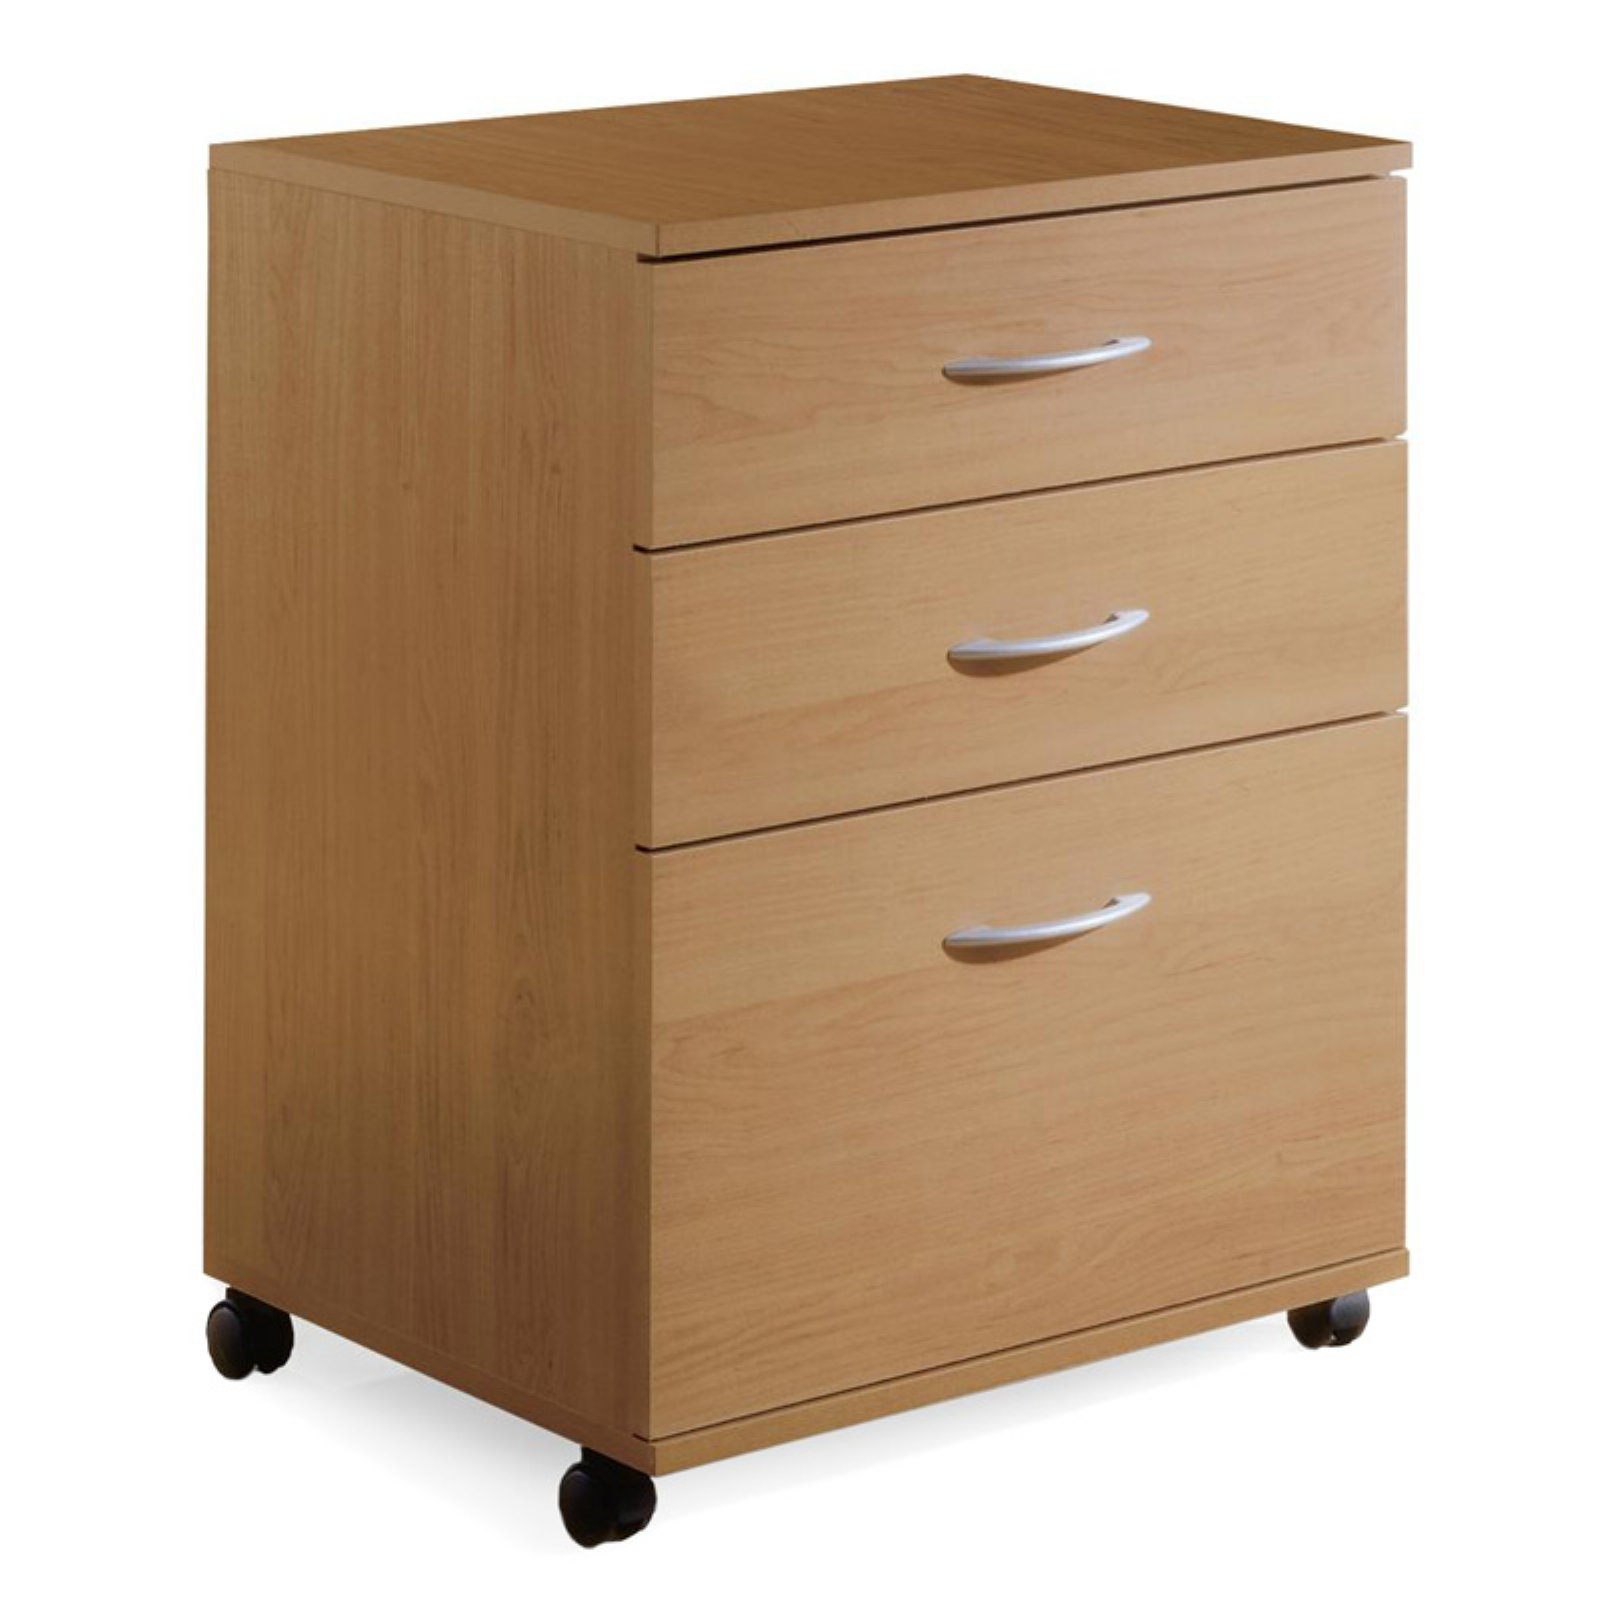 3 Drawers Vertical Wood Composite Filing Cabinet Walmart pertaining to measurements 1600 X 1600